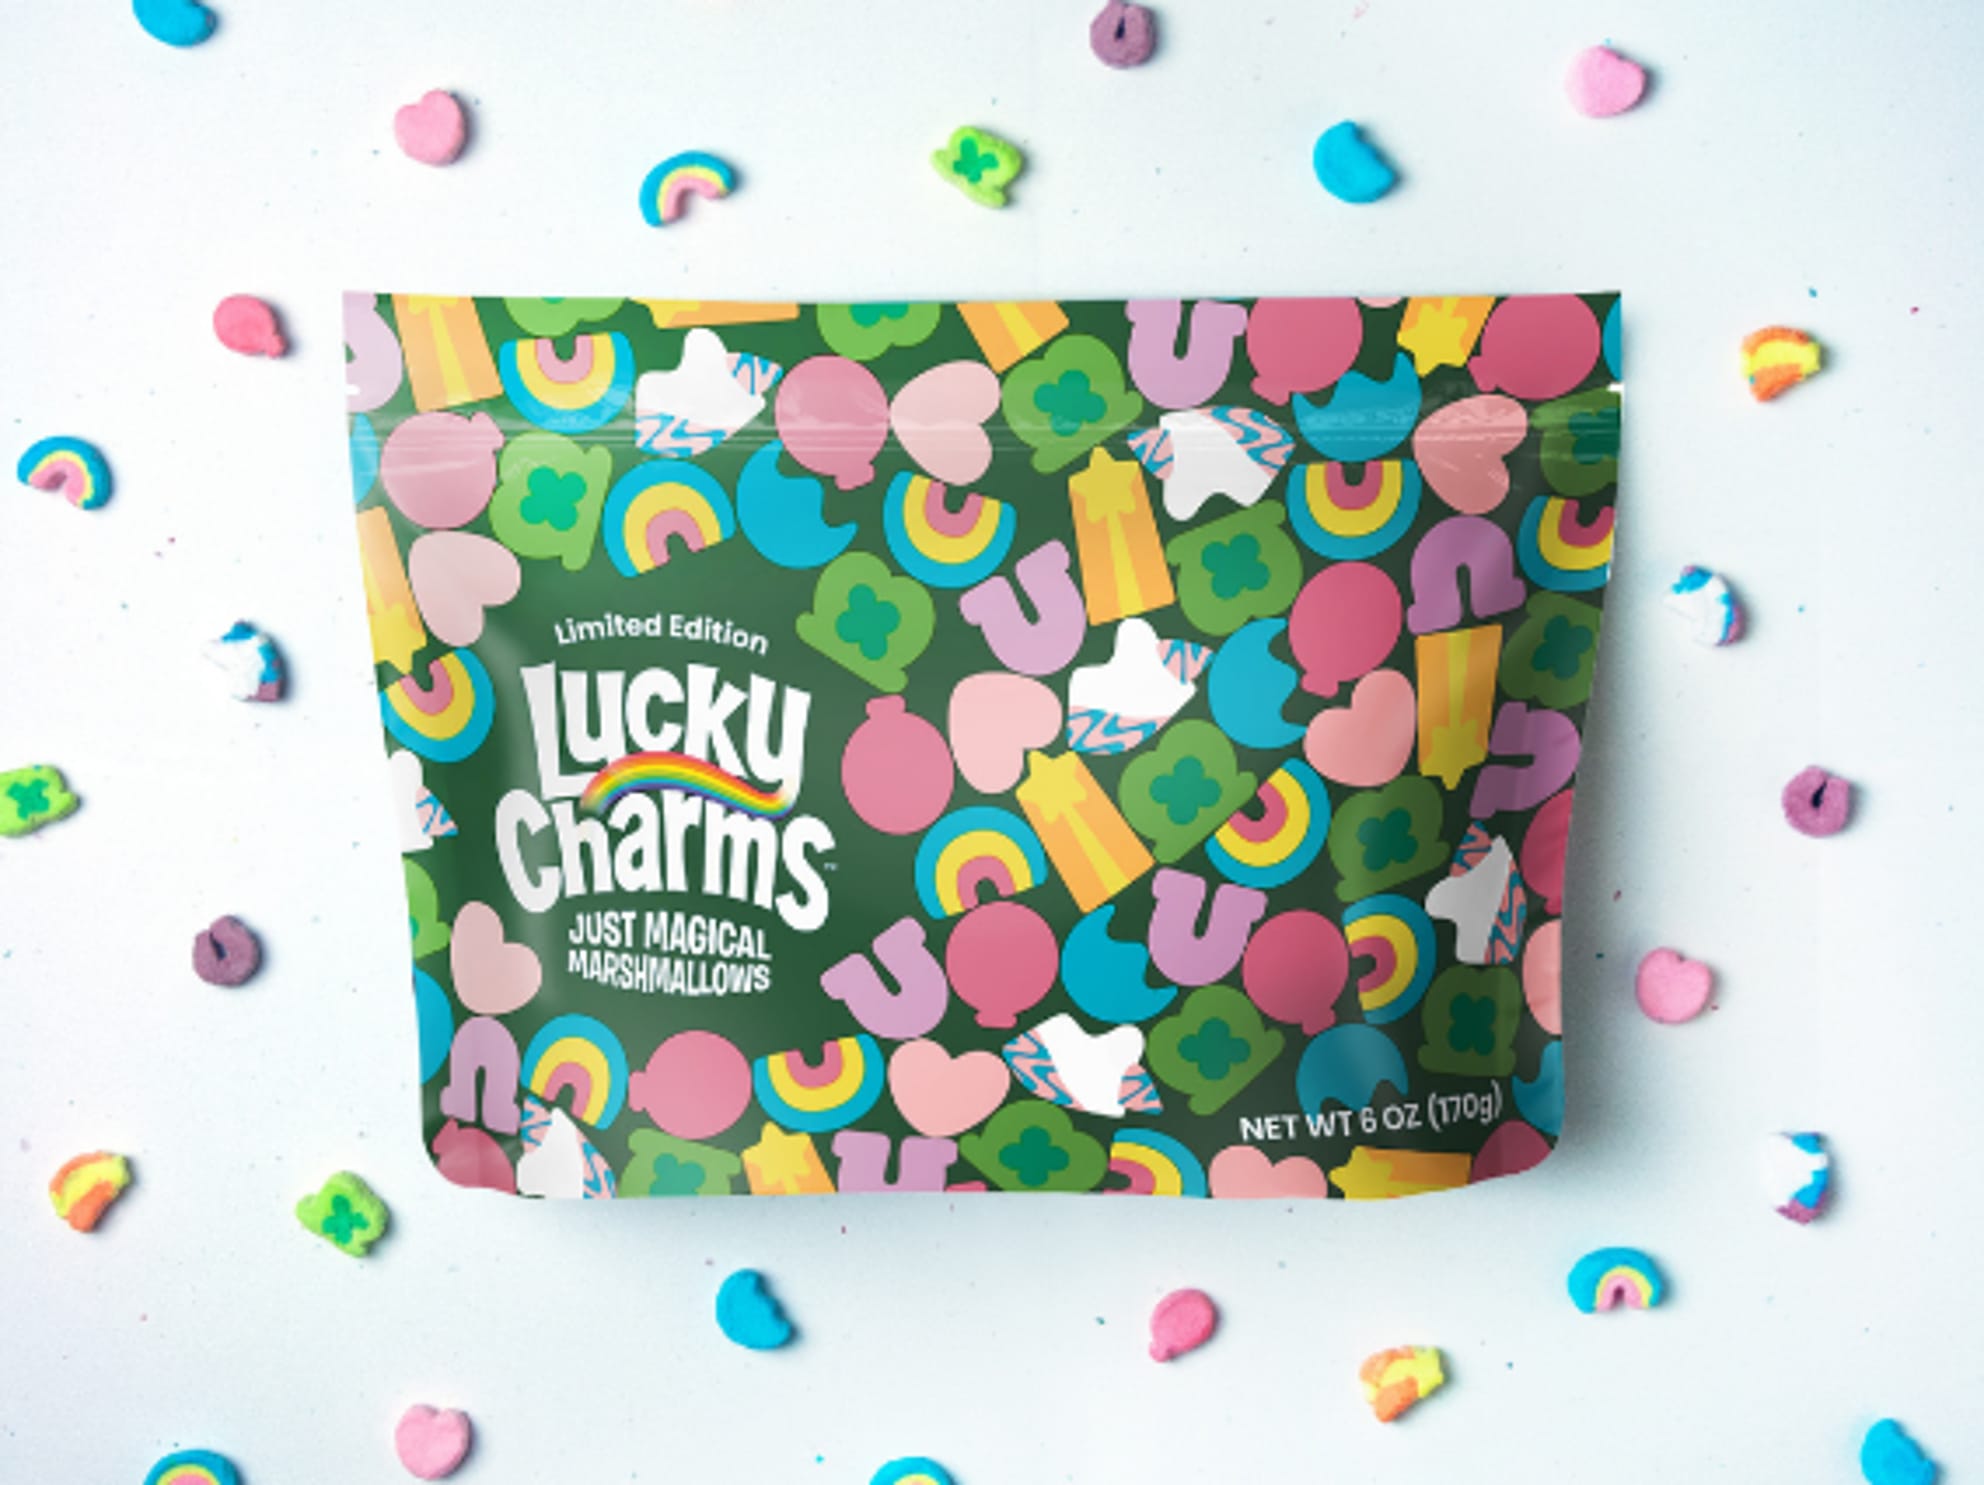 The forgotten Lucky Charms mascot - General Mills